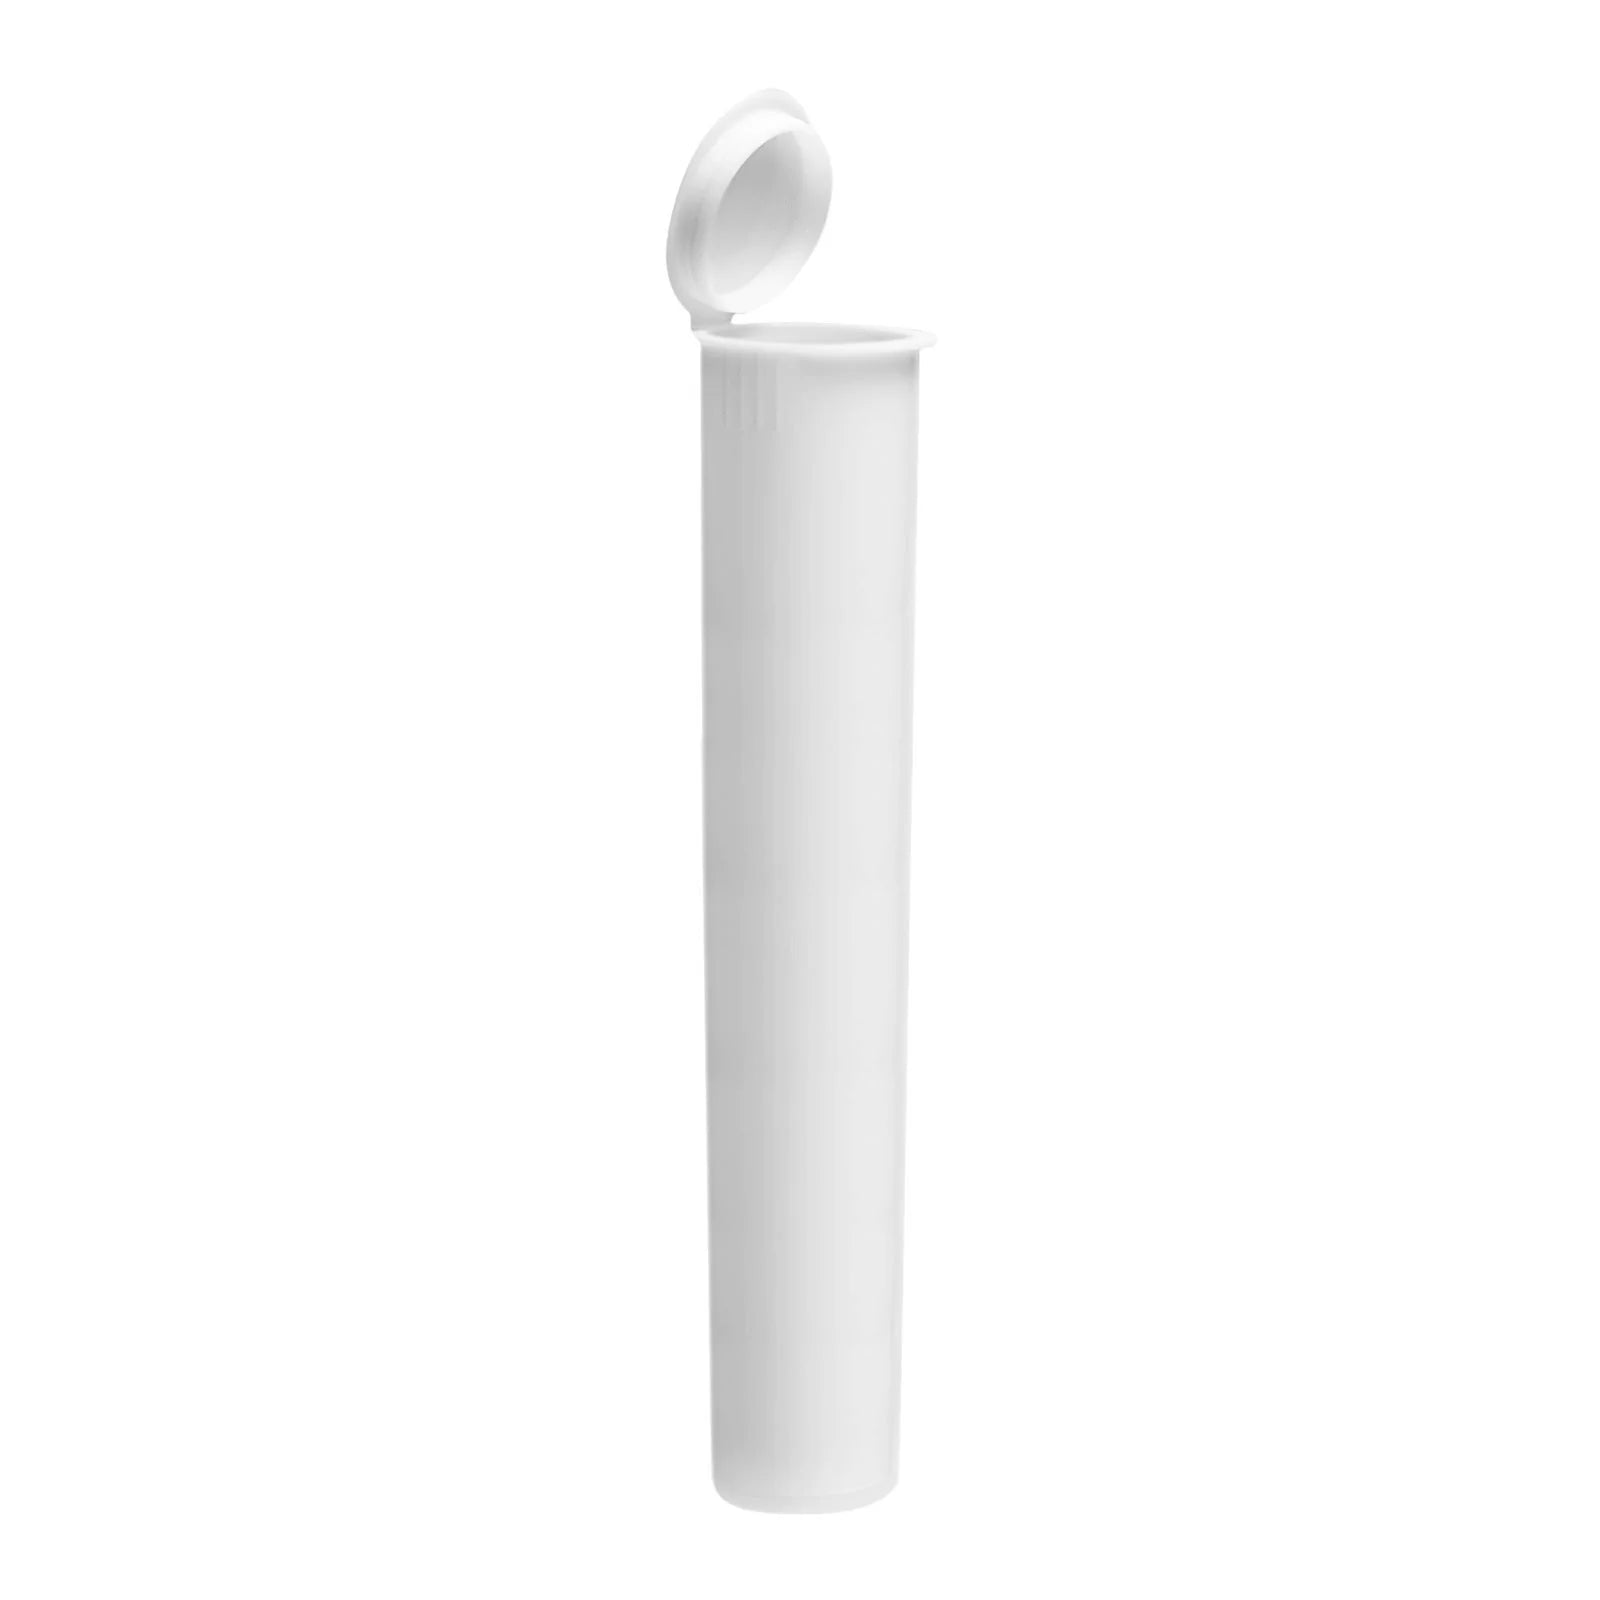 116mm Rx Squeeze Tubes Opaque White - 1000 Count